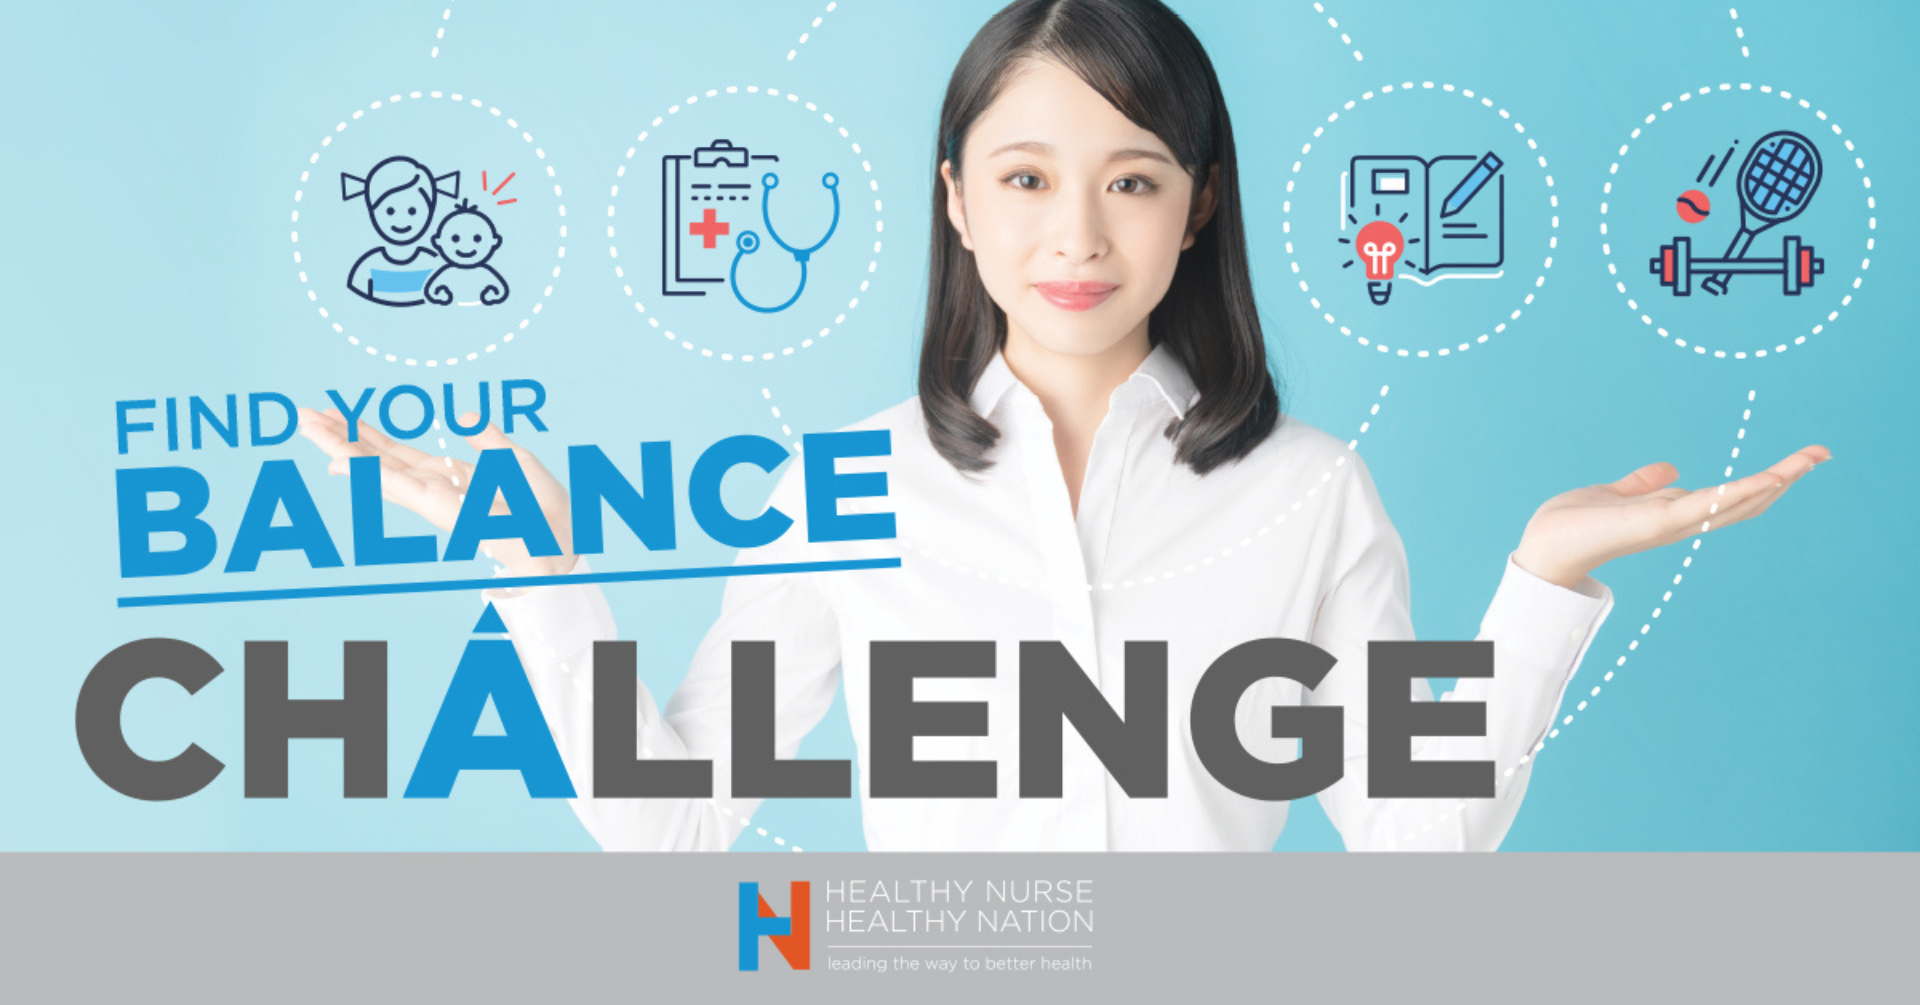 Try a New Hobby - Healthy Nurse, Healthy Nation - Find Your Balance challenge - Day 8 4650